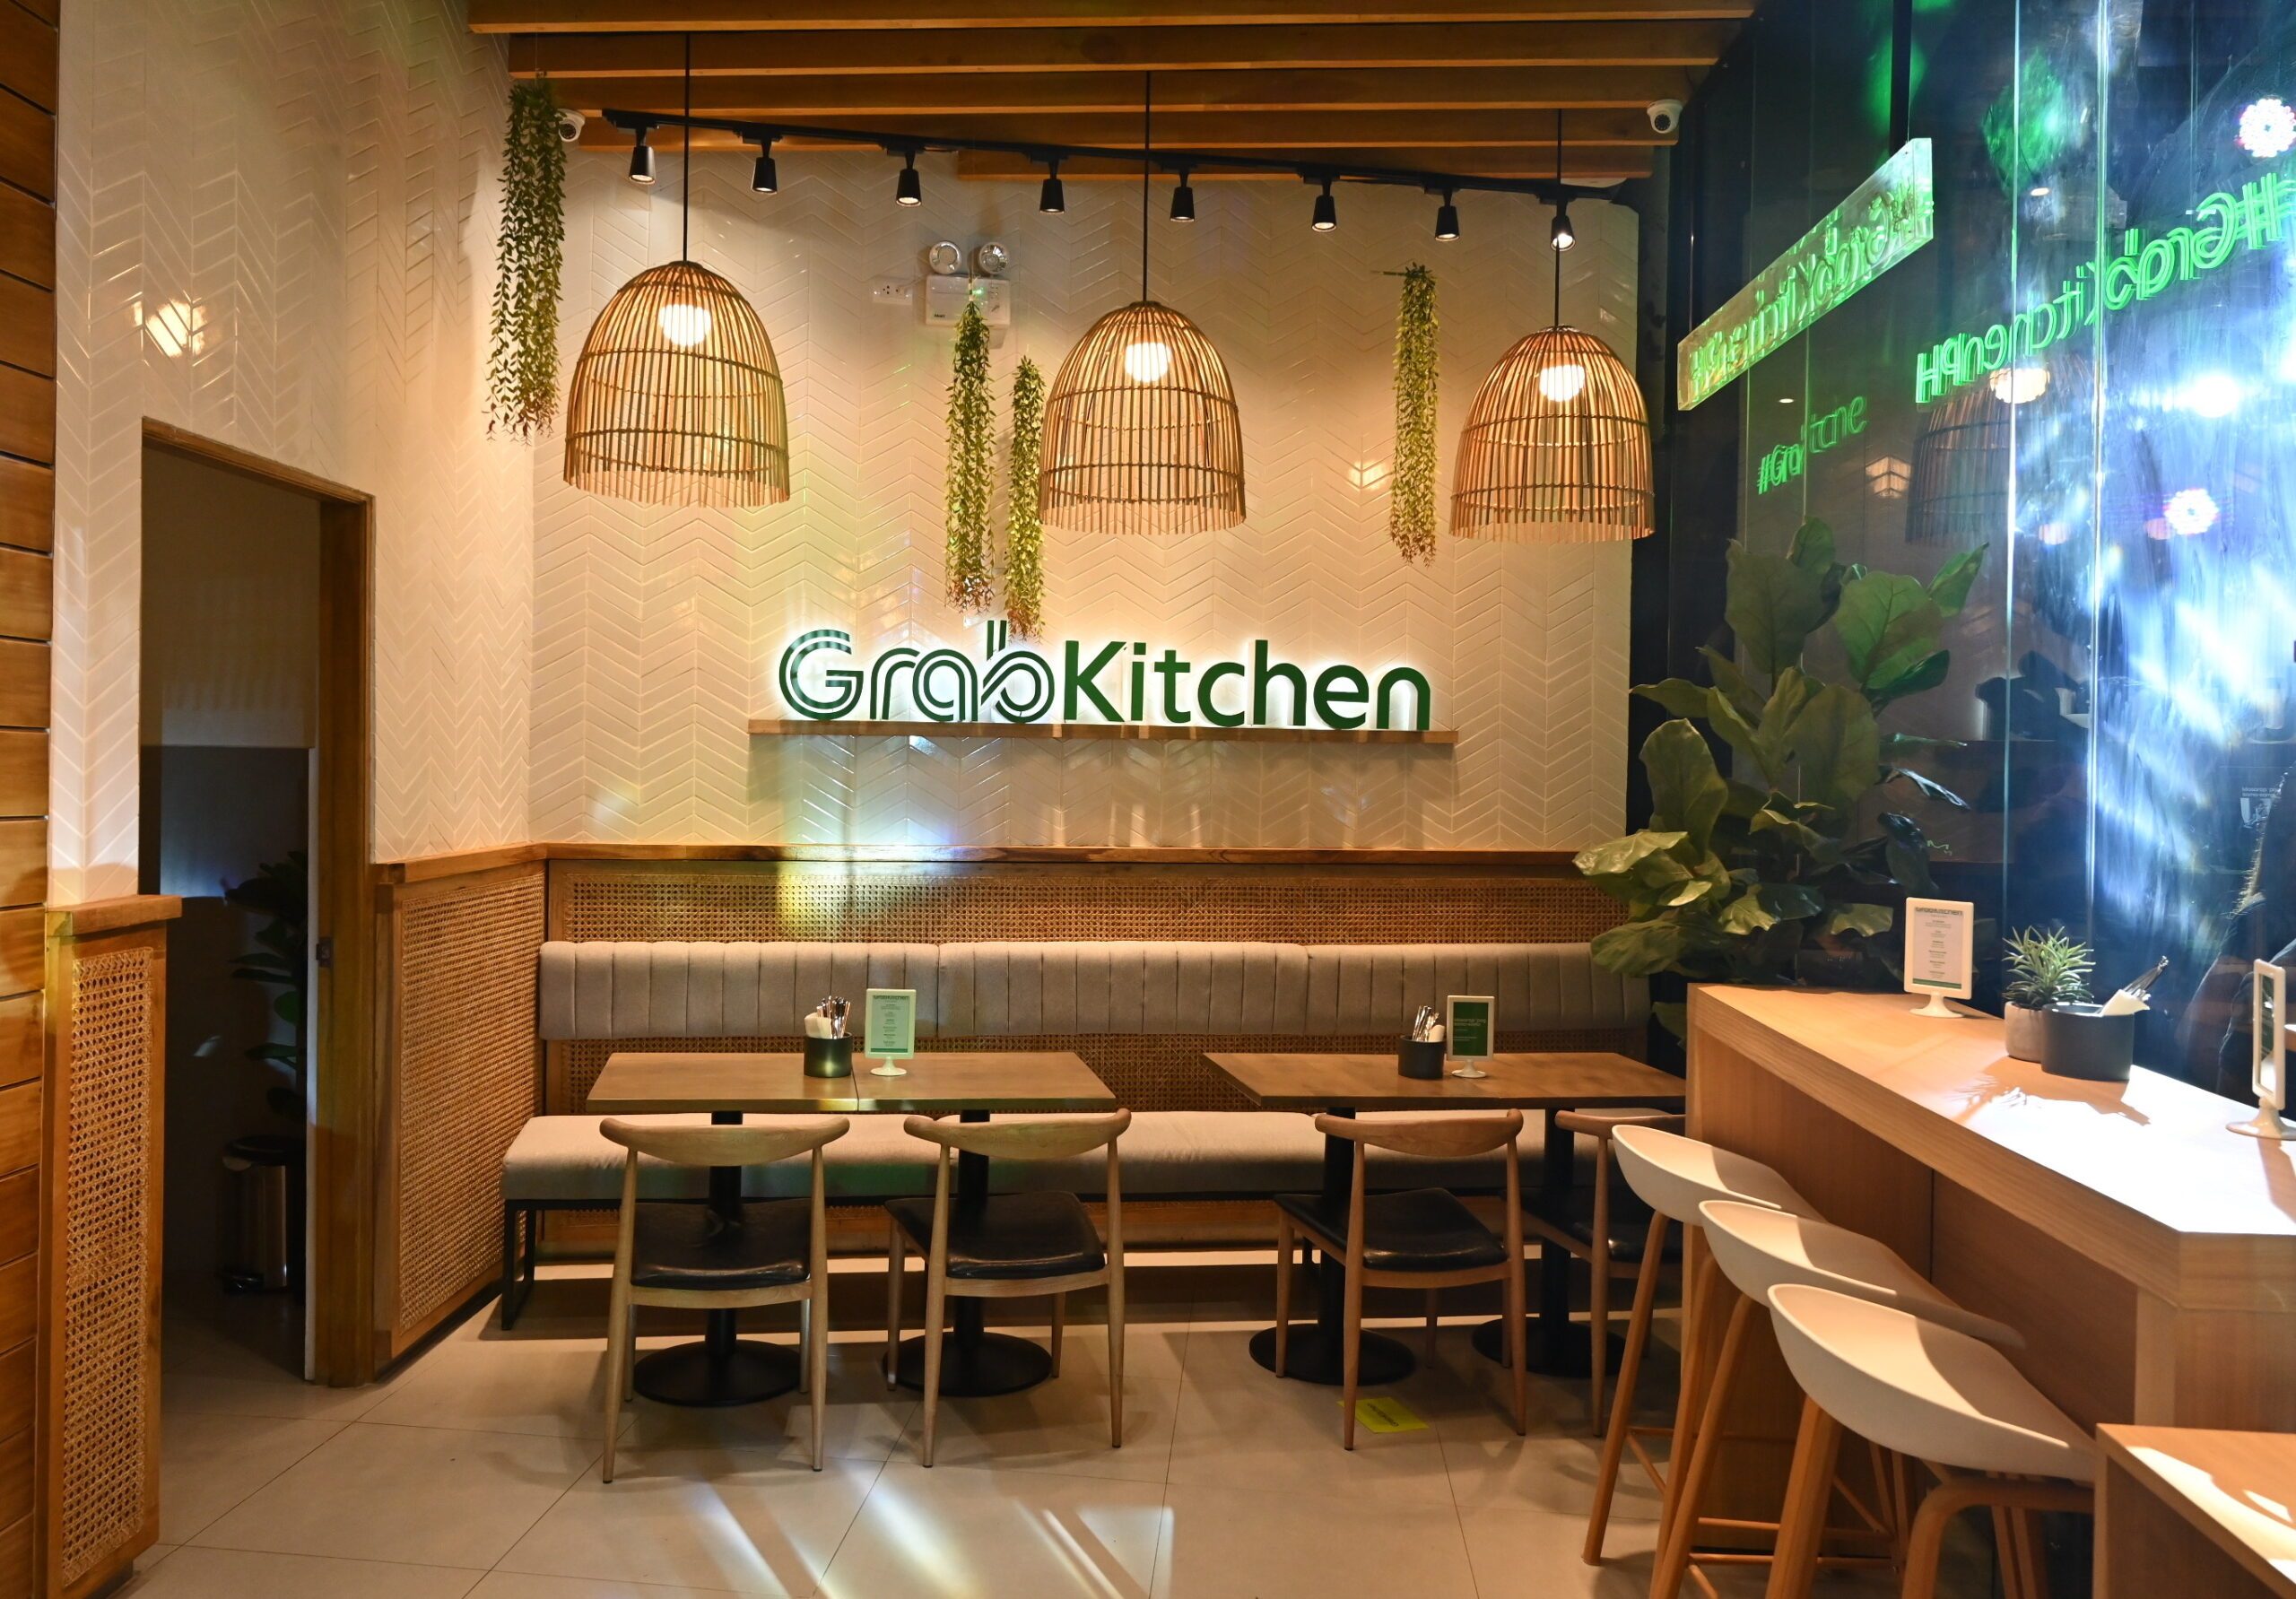 GrabKitchen opens new branches in Parañaque, Malate